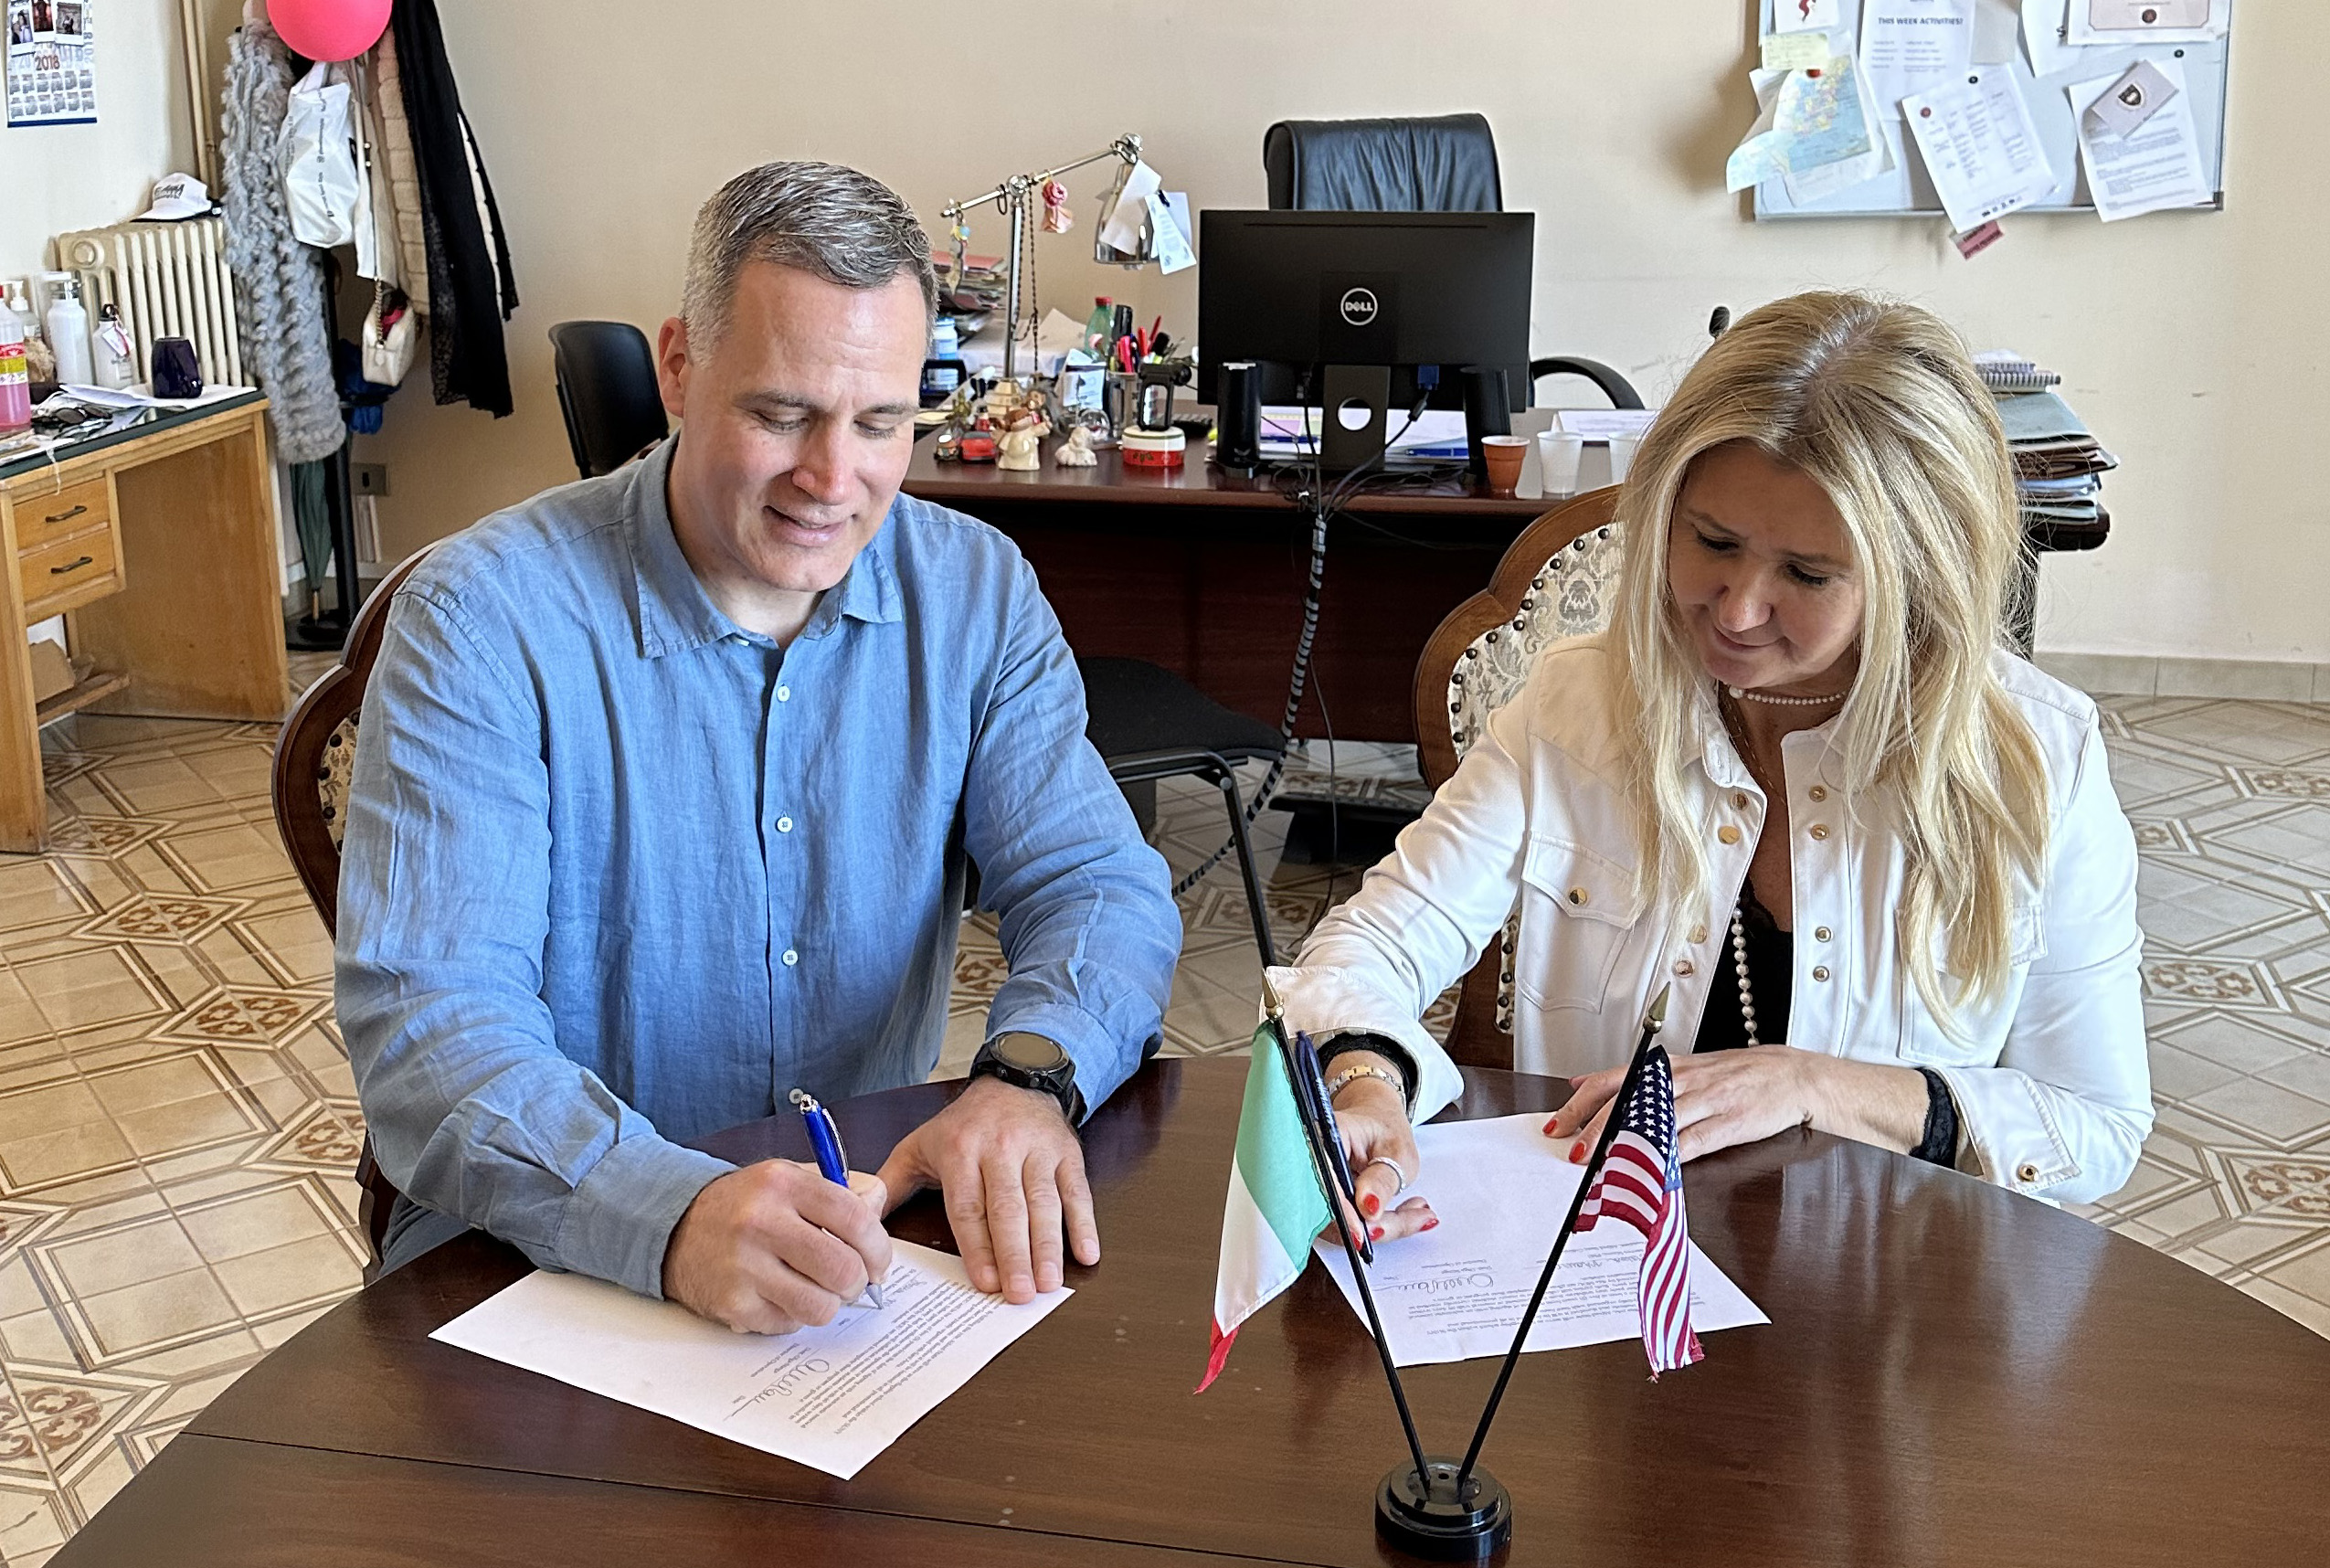 Presidents Mauro and Panicco signed a memorandum of understanding for continuing the ASC and Sant’Anna Institute partnership that started in 2009.